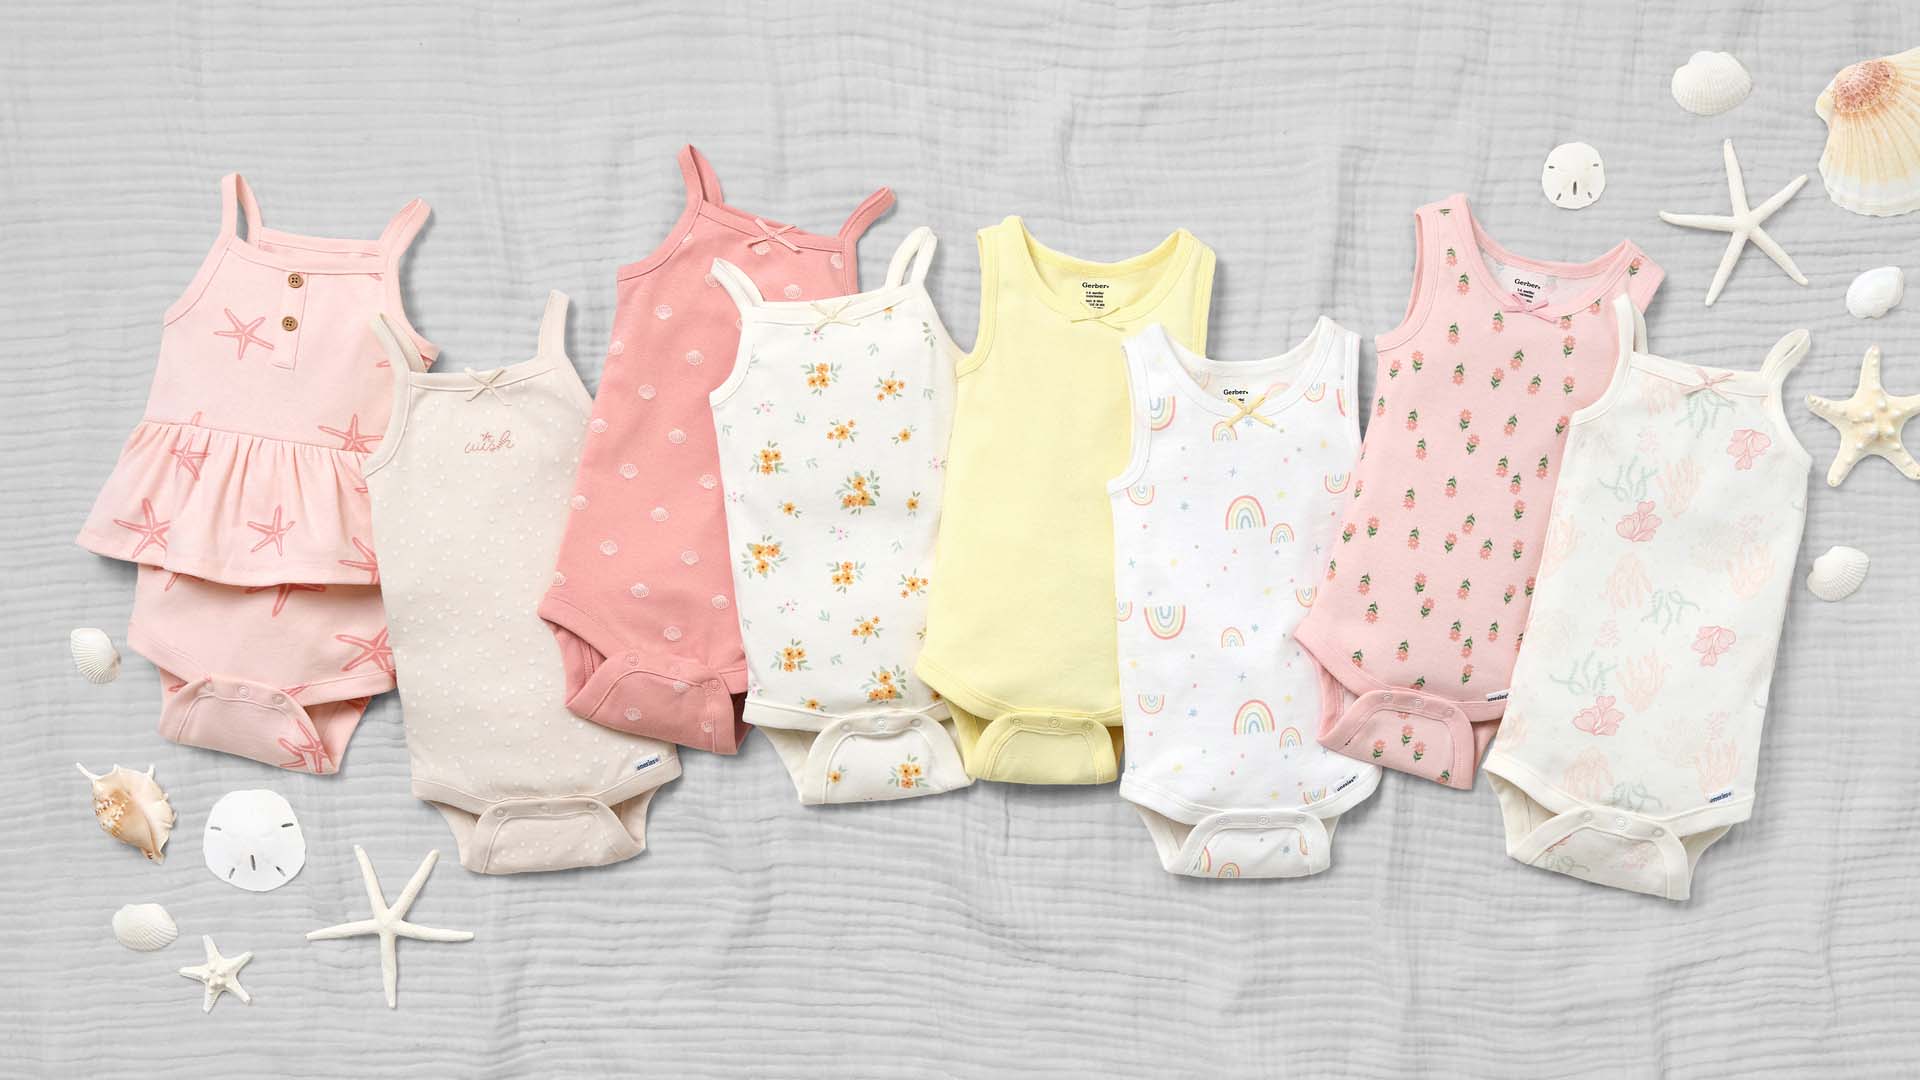 Eight baby onesies in various pastel colors and patterns laid out on a textured gray background, accompanied by small seashells and starfish.